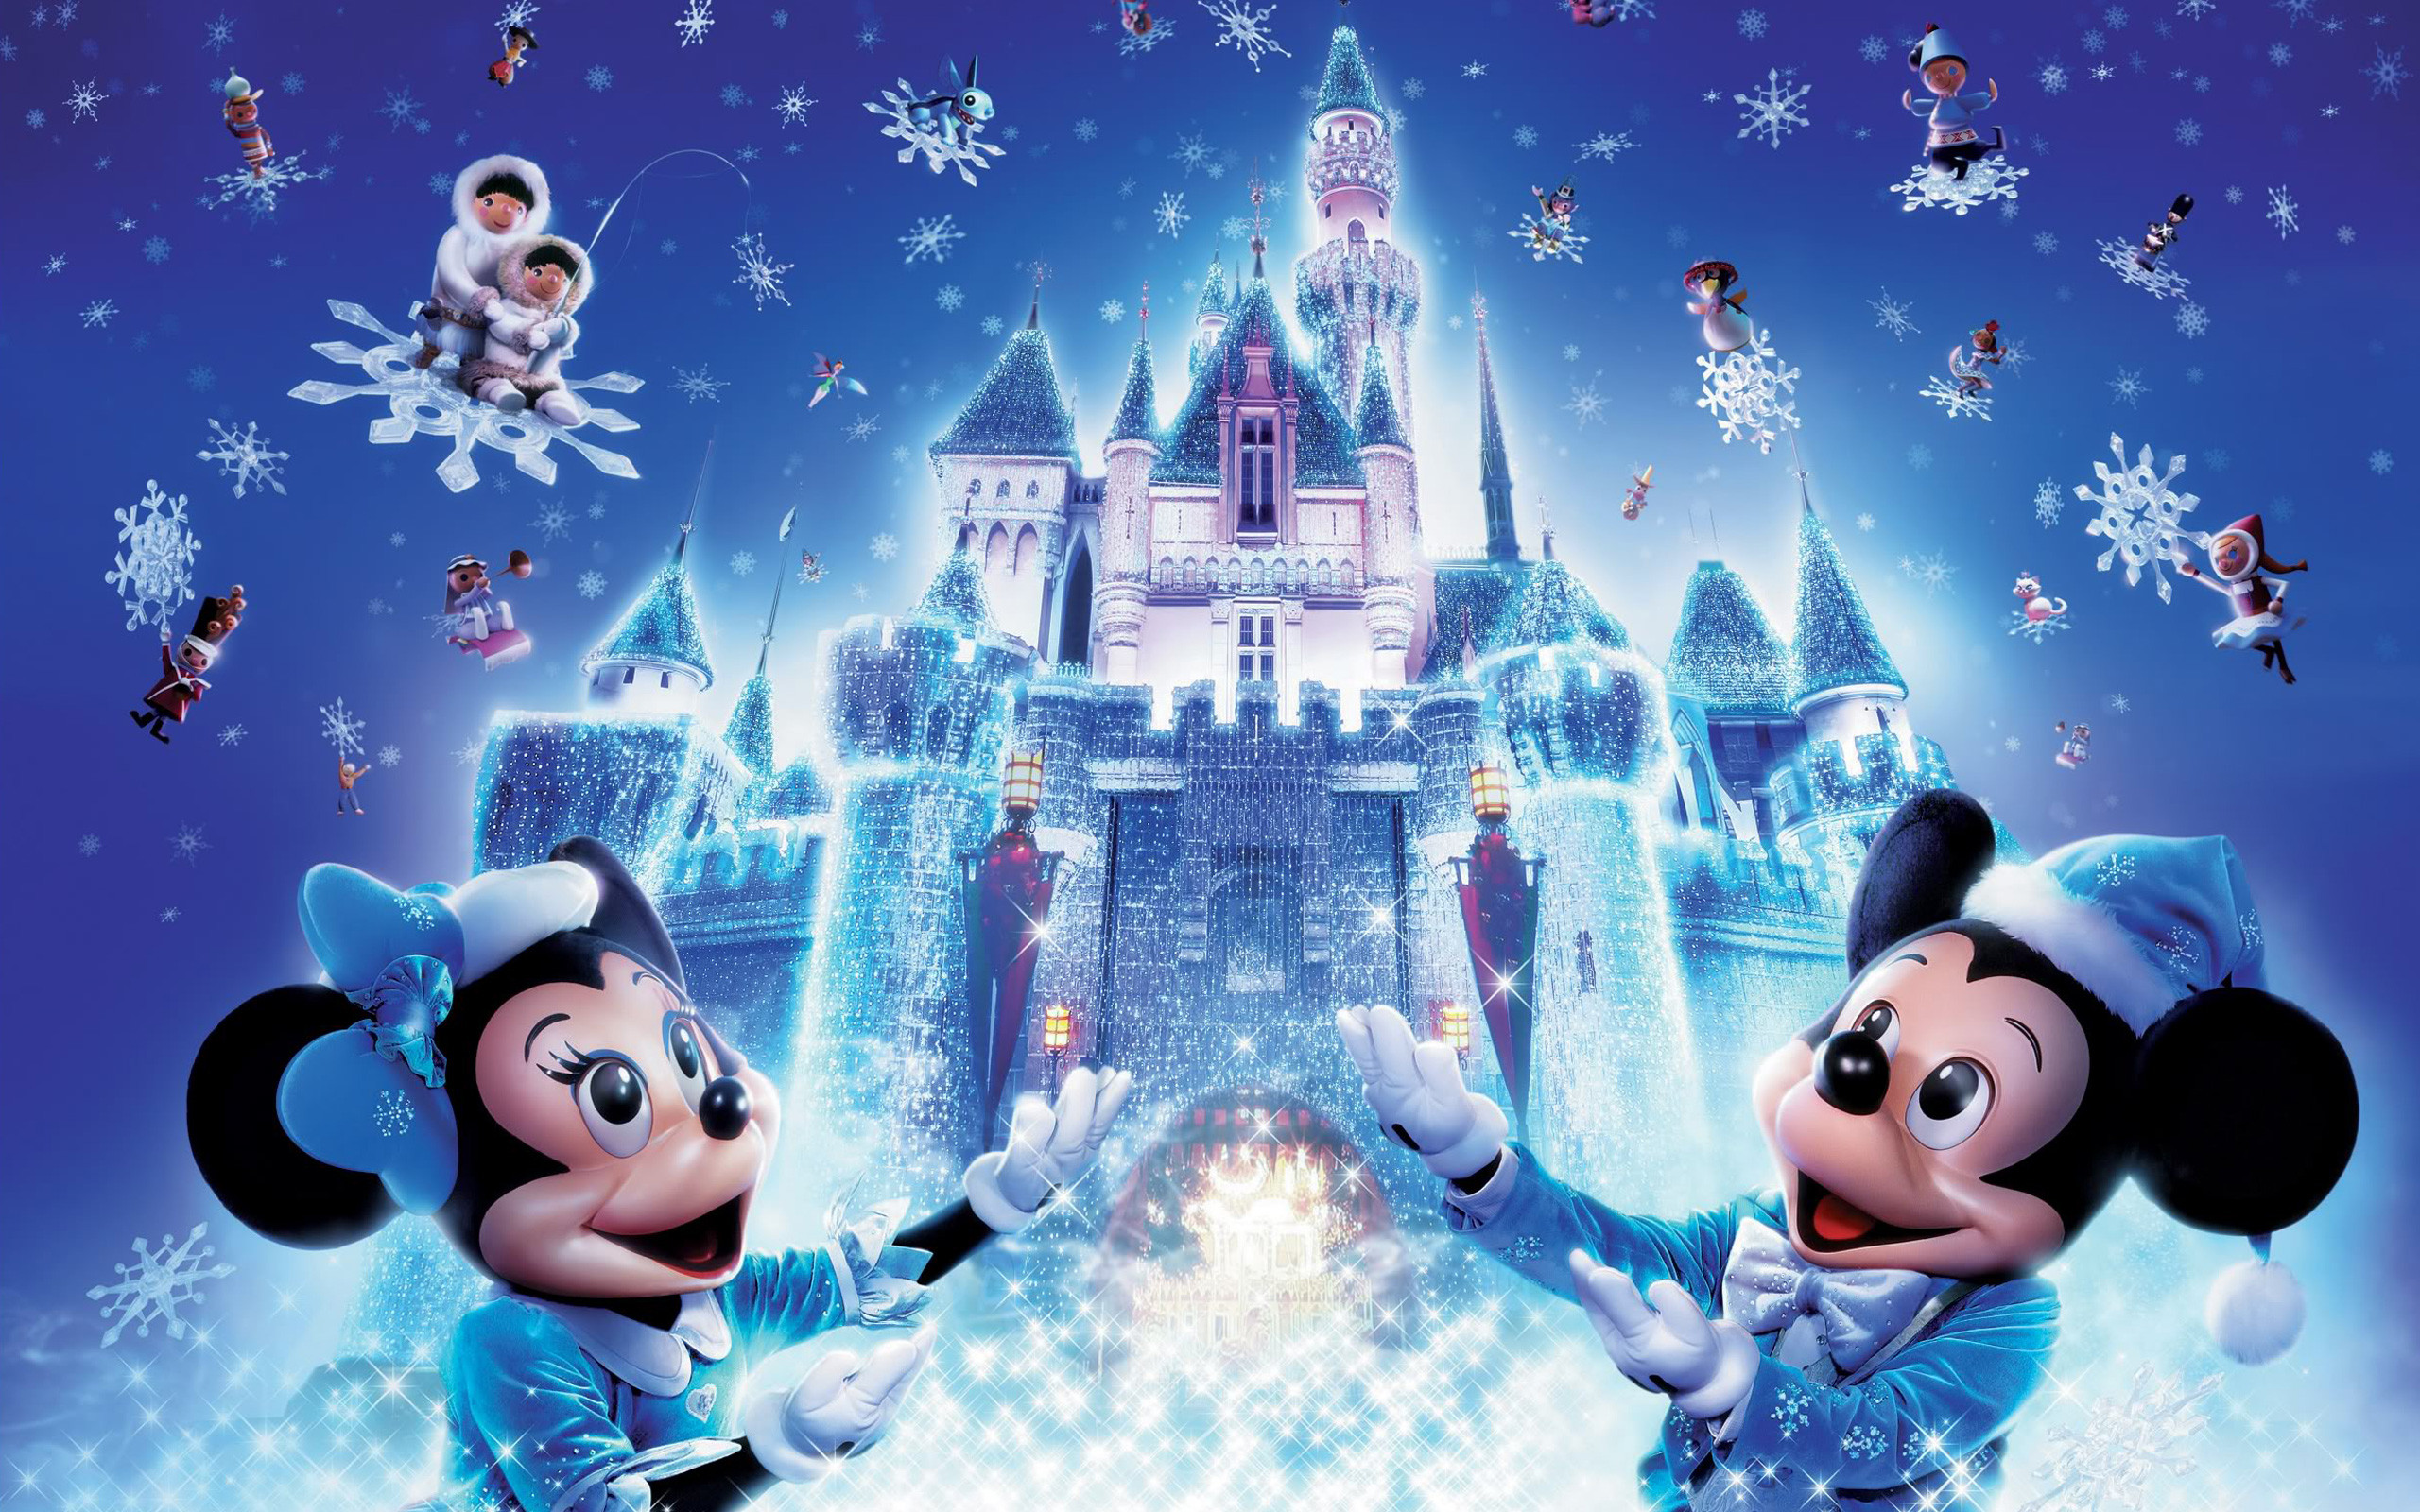  30 Disney World Holiday Wallpapers That Will Instantly Make Your Phone  or Desktop Magical  AllEarsNet